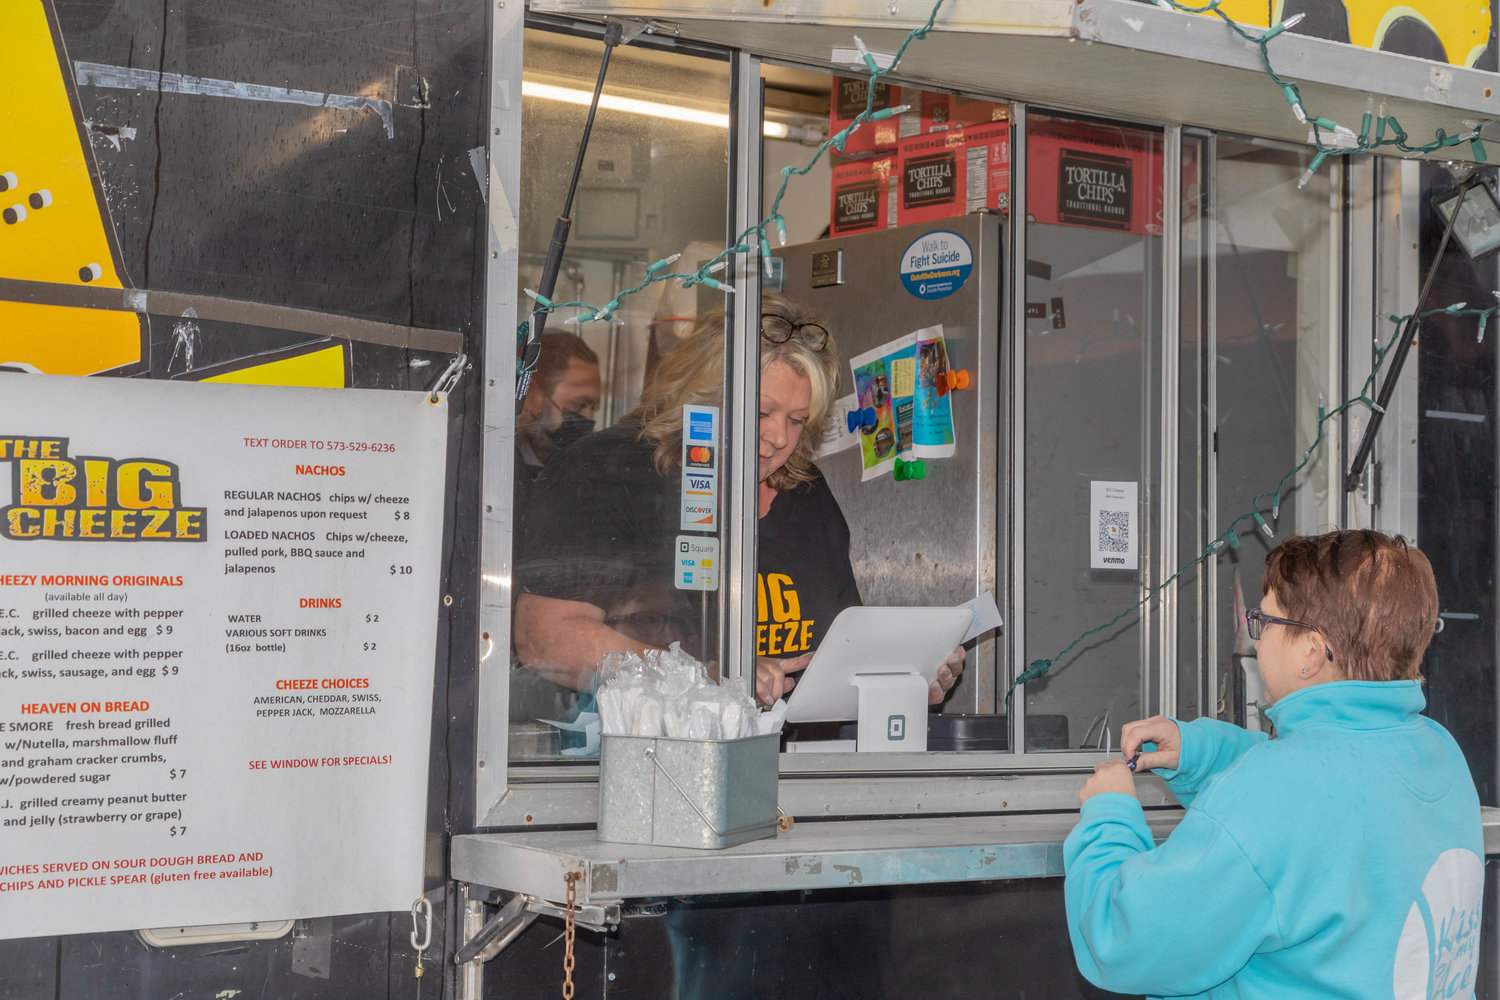 The Big Cheese serves a customer during the Street Food Throwdown at The Fennel Wednesday in Moberly. A short rain met the opening of the event but moved out in time for Concannon’s performance. Organizers estimated that nearly 1,000 people attended.